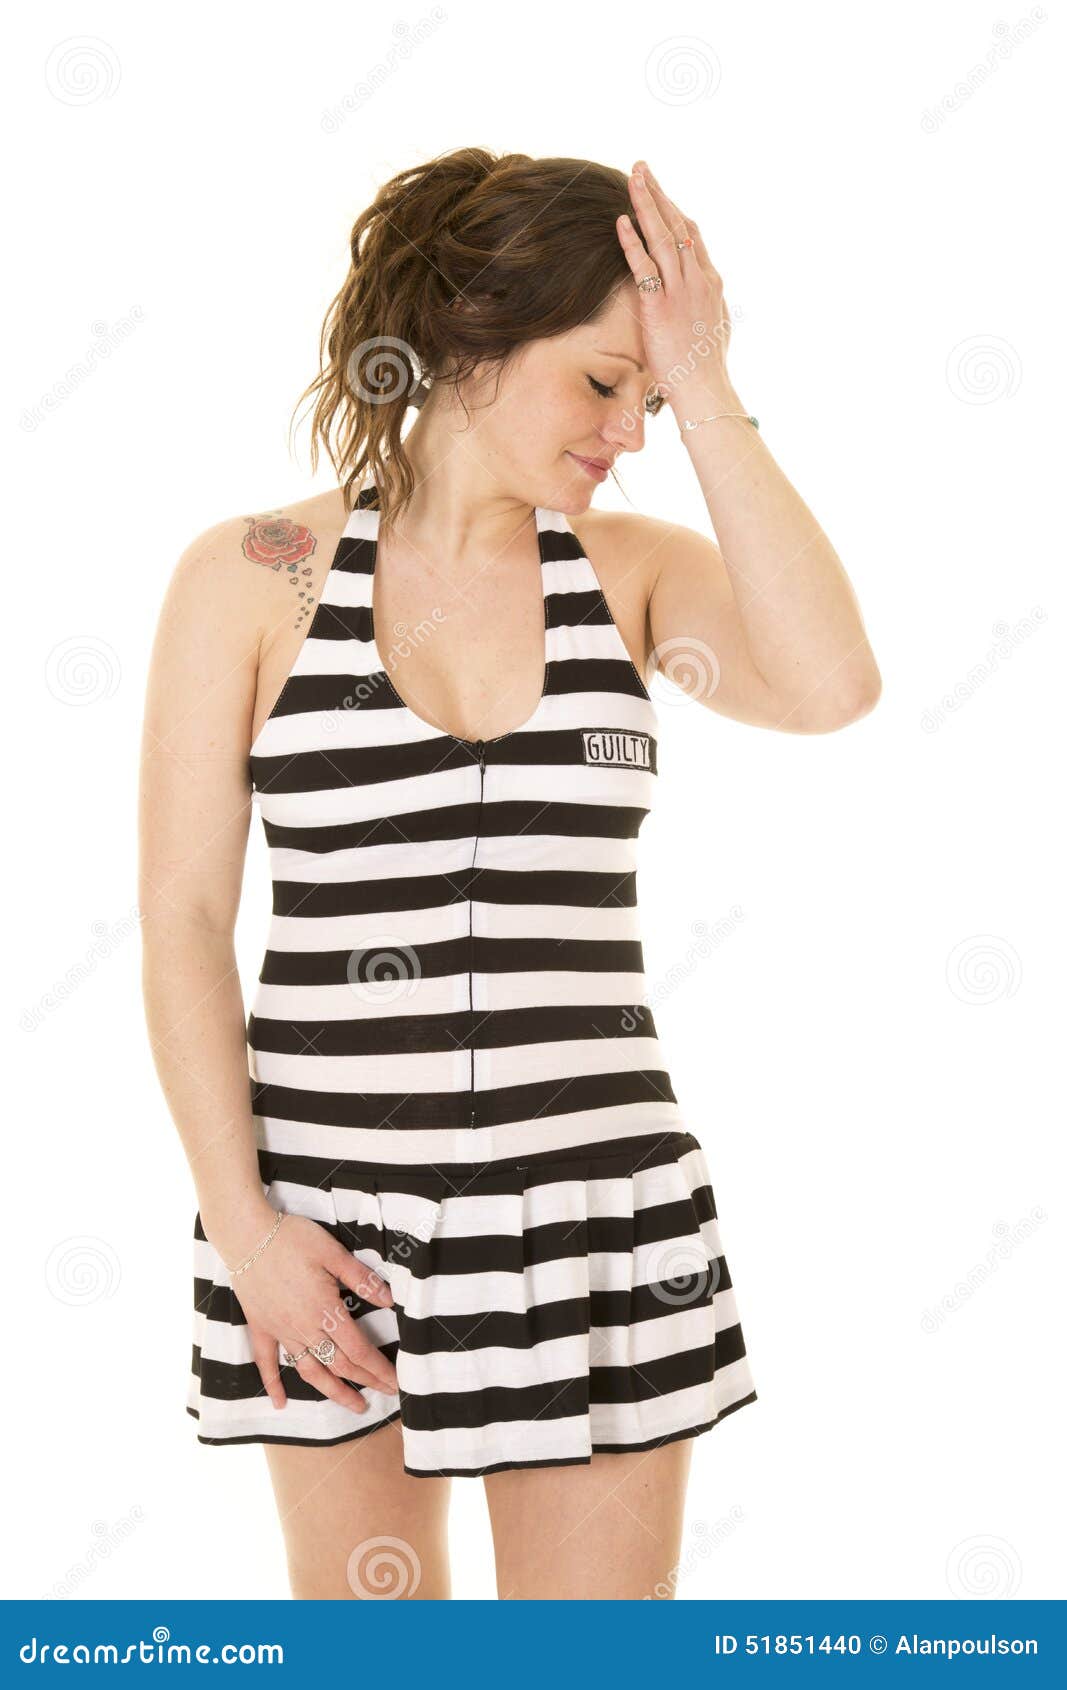 woman in prison outfit skirt with ball and chain on foot Stock Photo